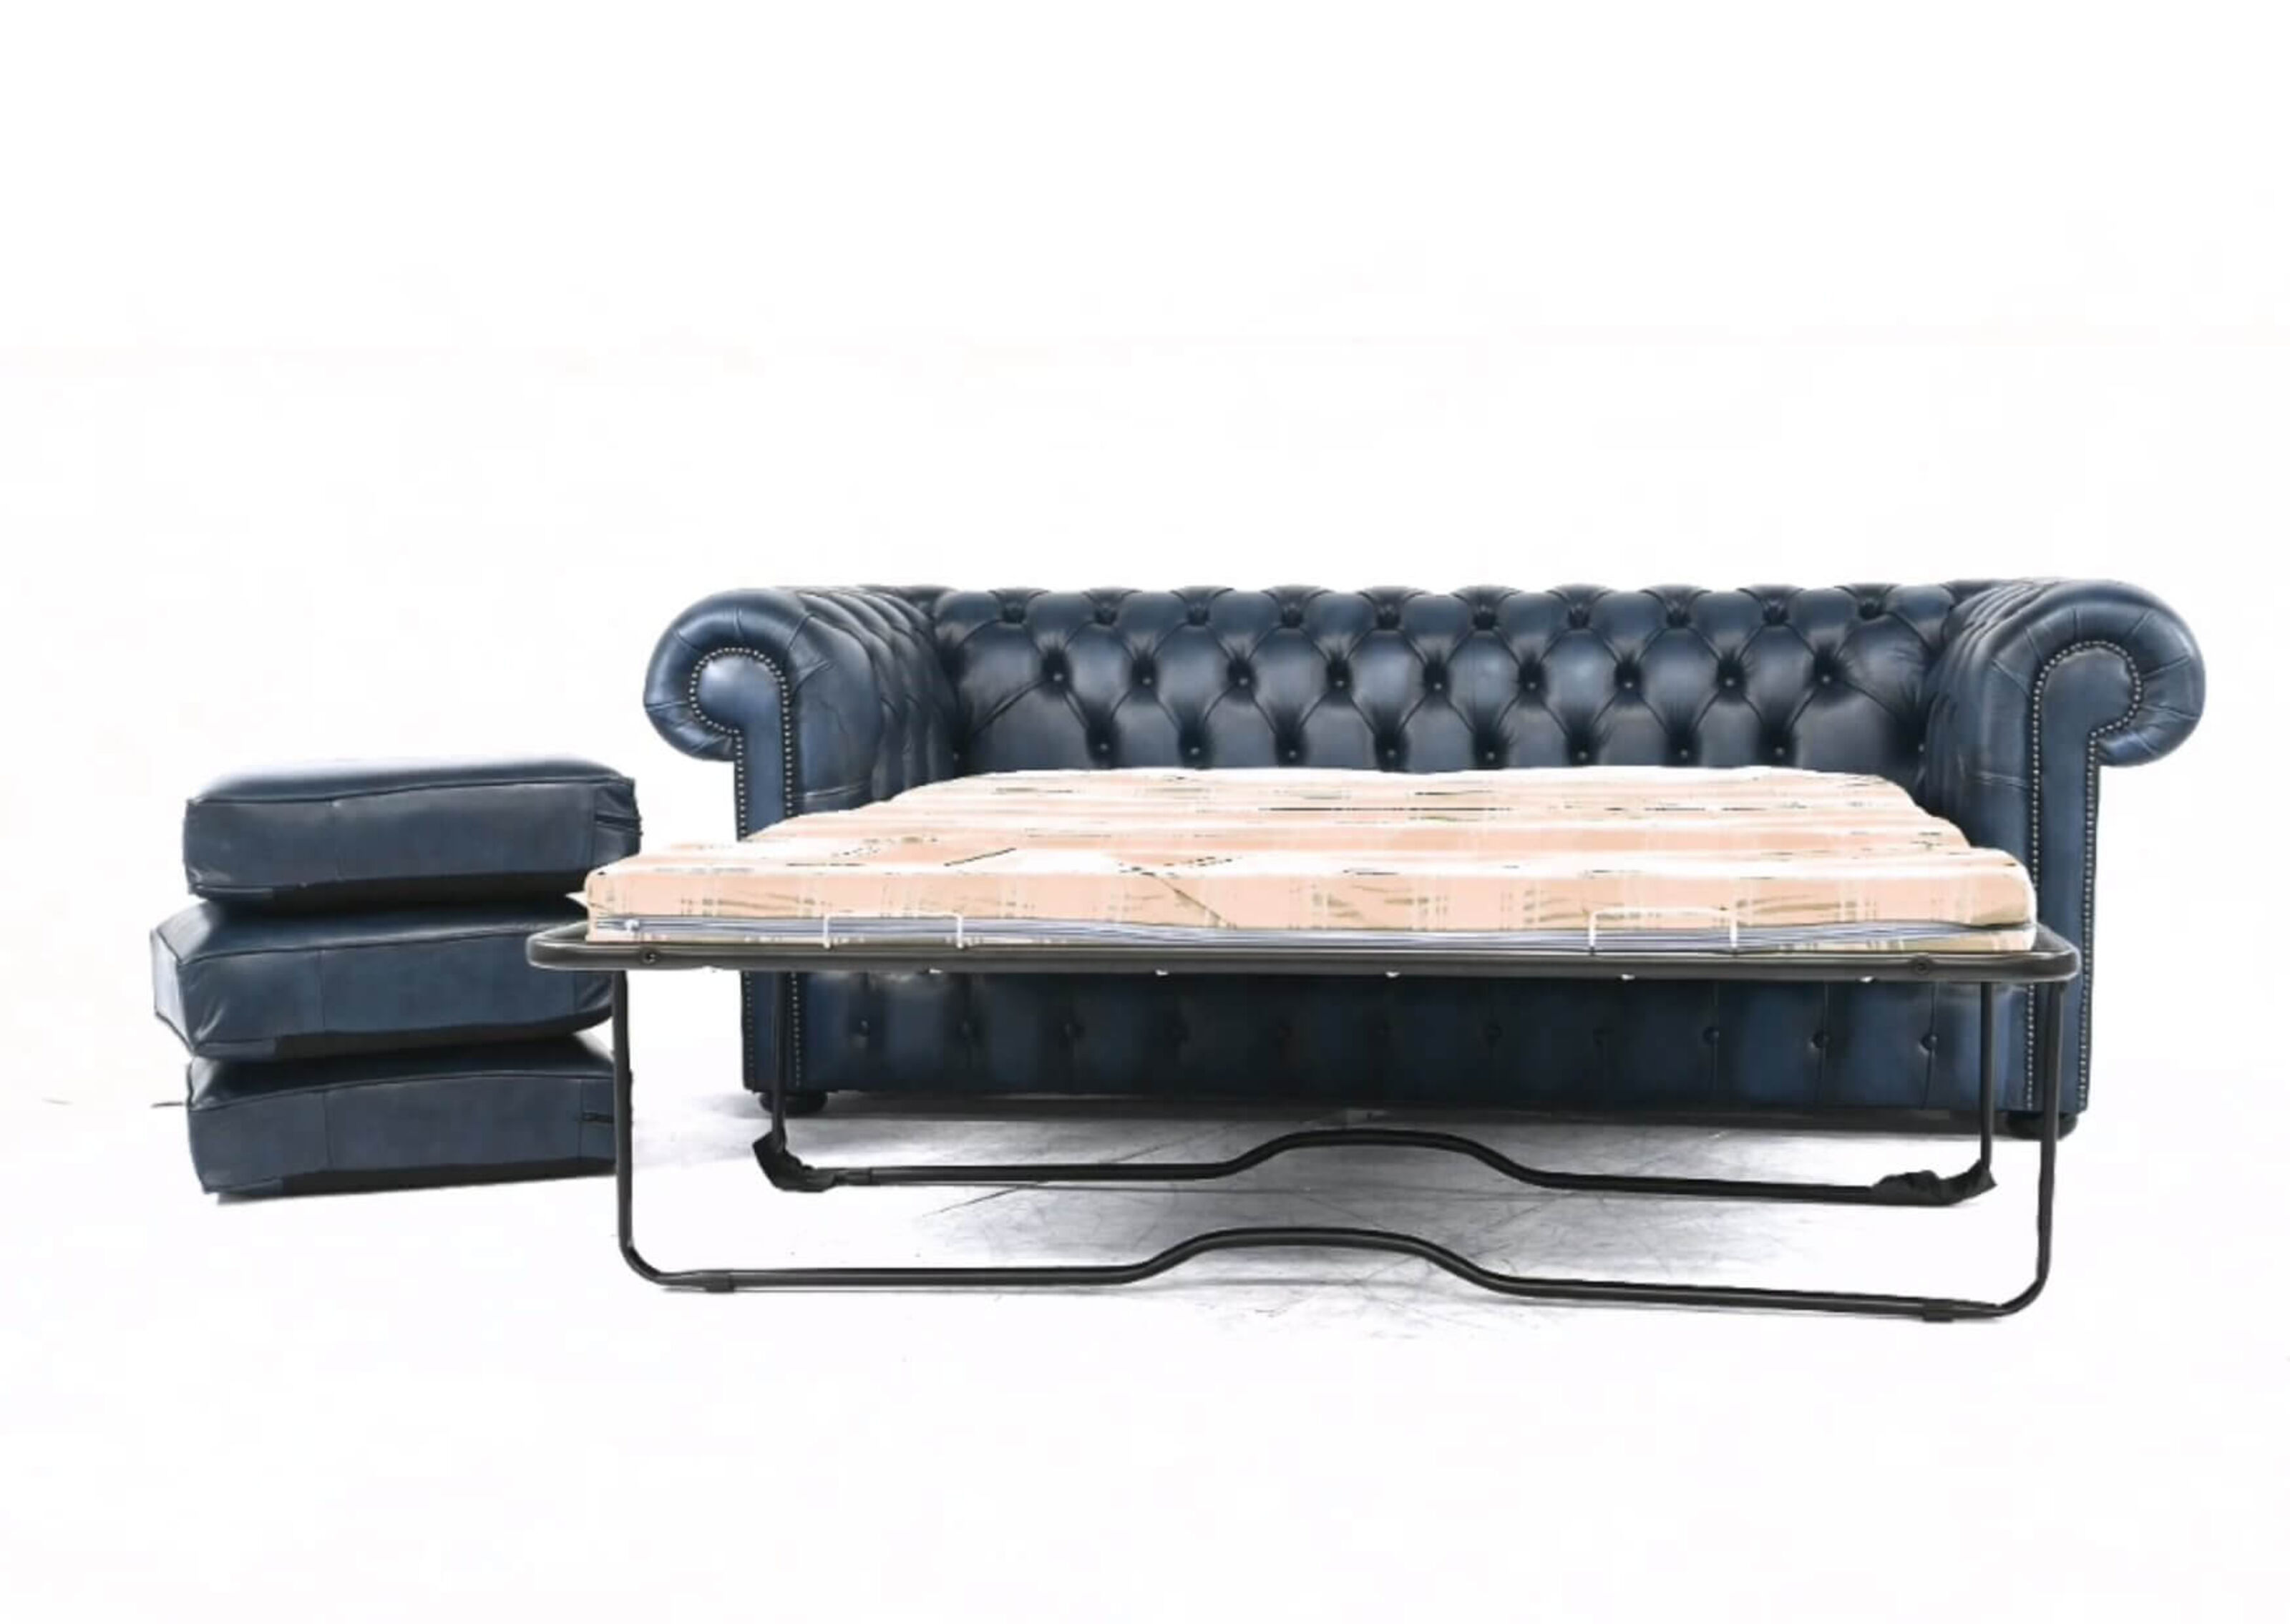 Unique Seating Solutions Bespoke Chesterfield Sofas  %Post Title